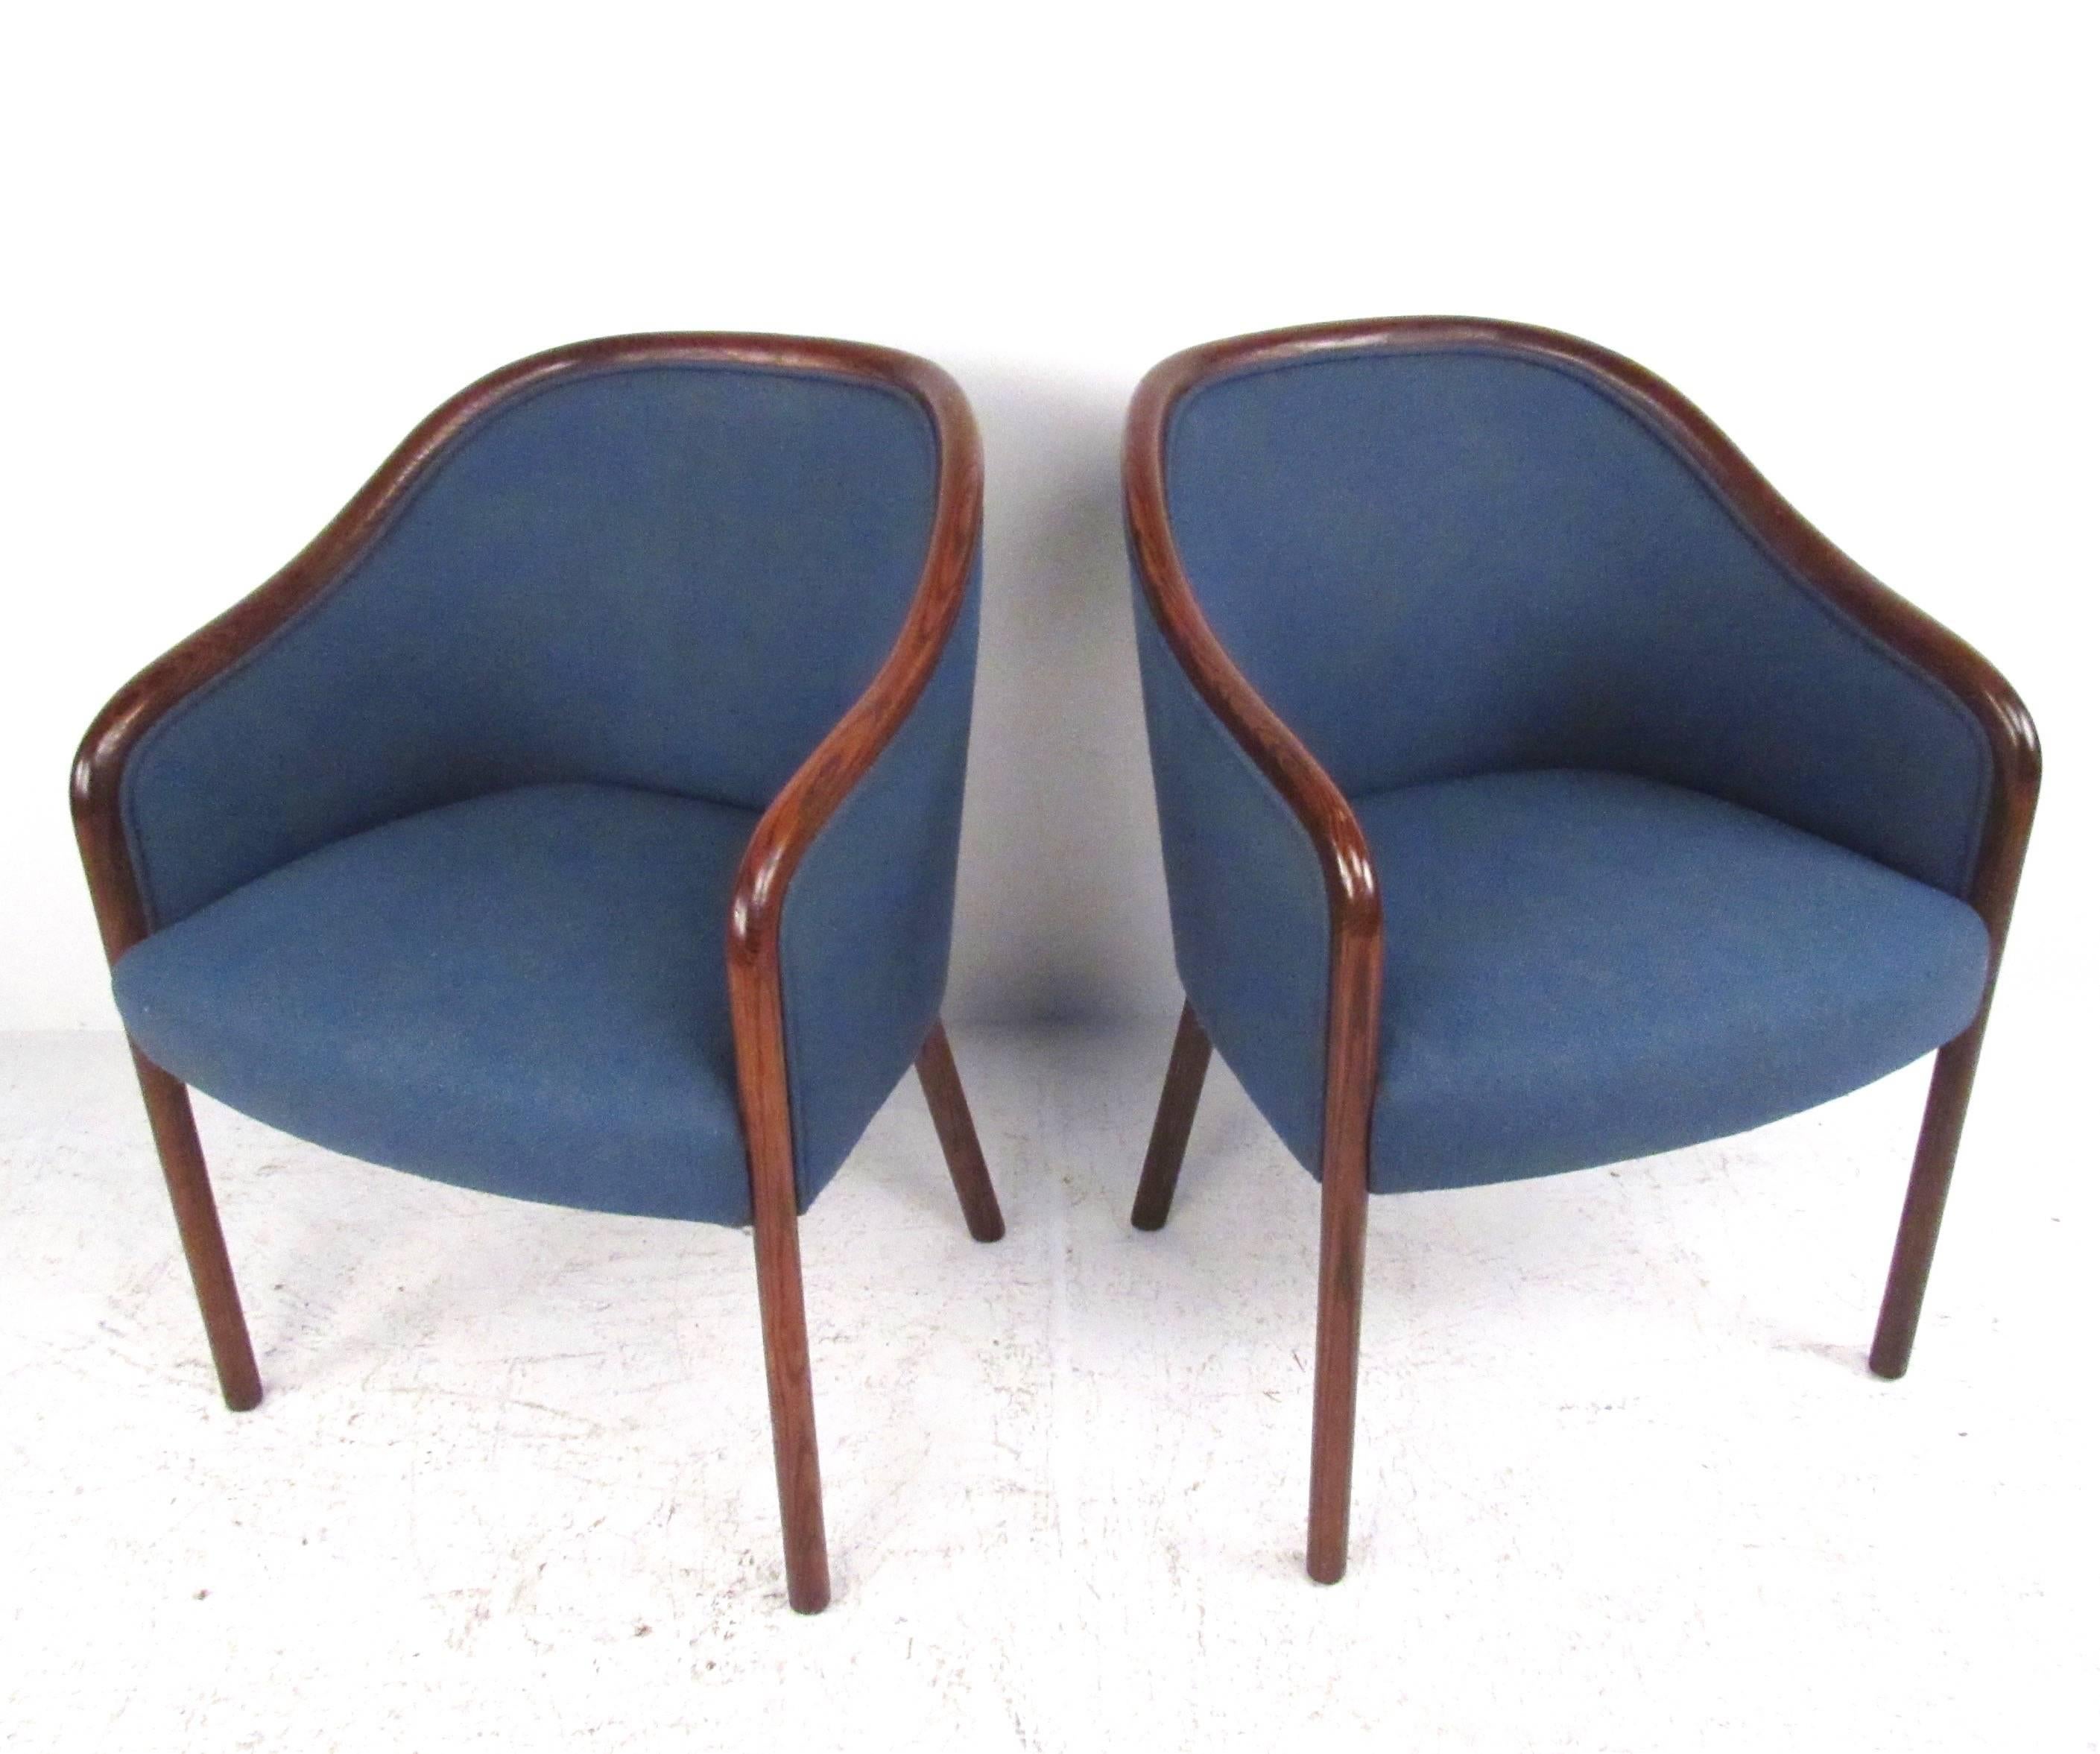 This pair of elegant Mid-Century side chairs features rosewood frames and vintage upholstered seats. Stylish sloped arm design pairs perfectly with rounded seat backs for a timeless mix of comfort and impeccable design. Please confirm item location